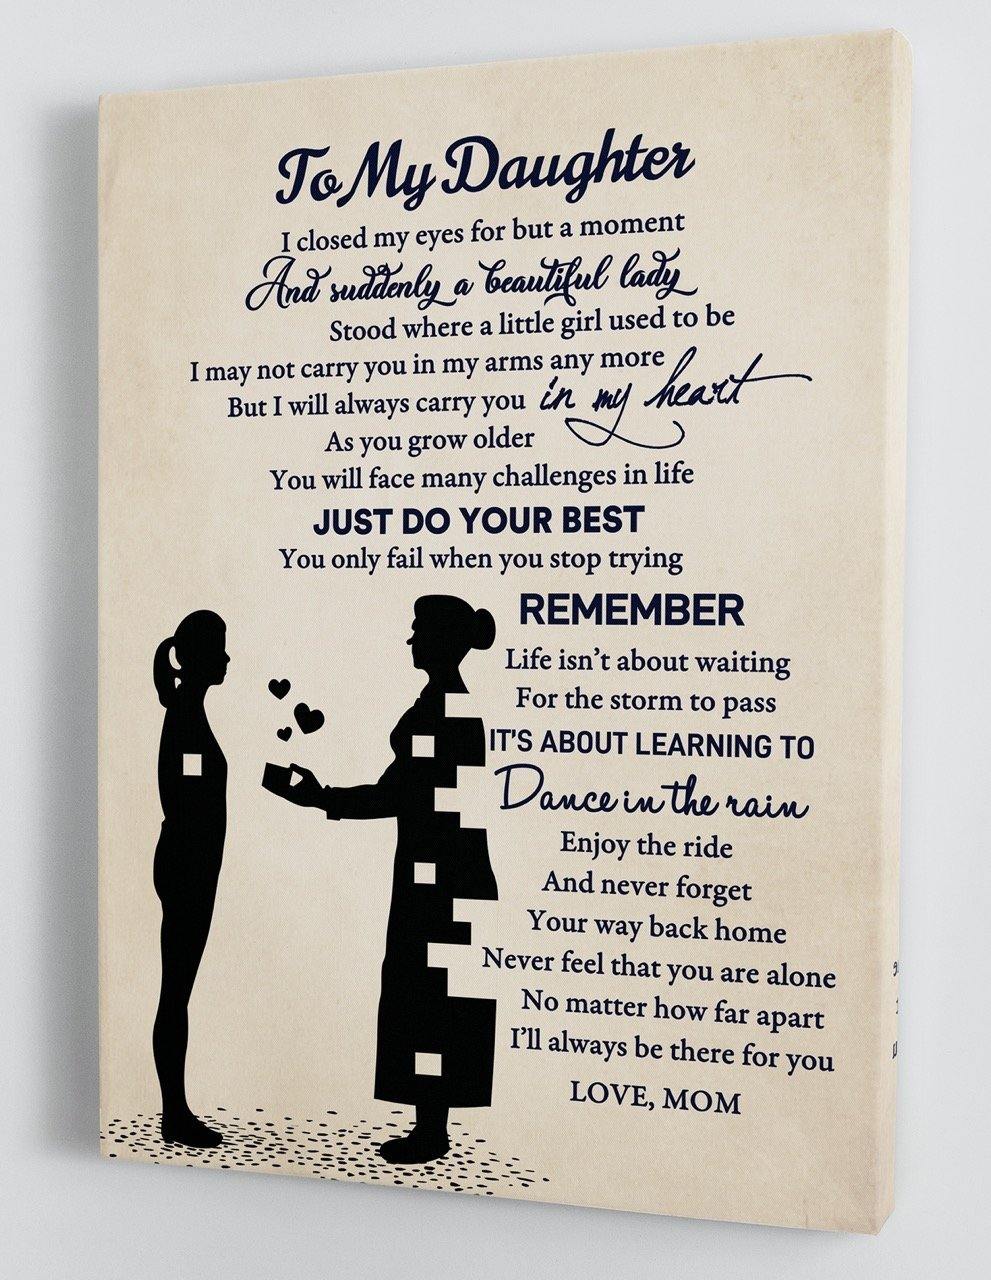 To My Daughter - From Mom - Framed Canvas Gift MD040 - DivesArt LLC